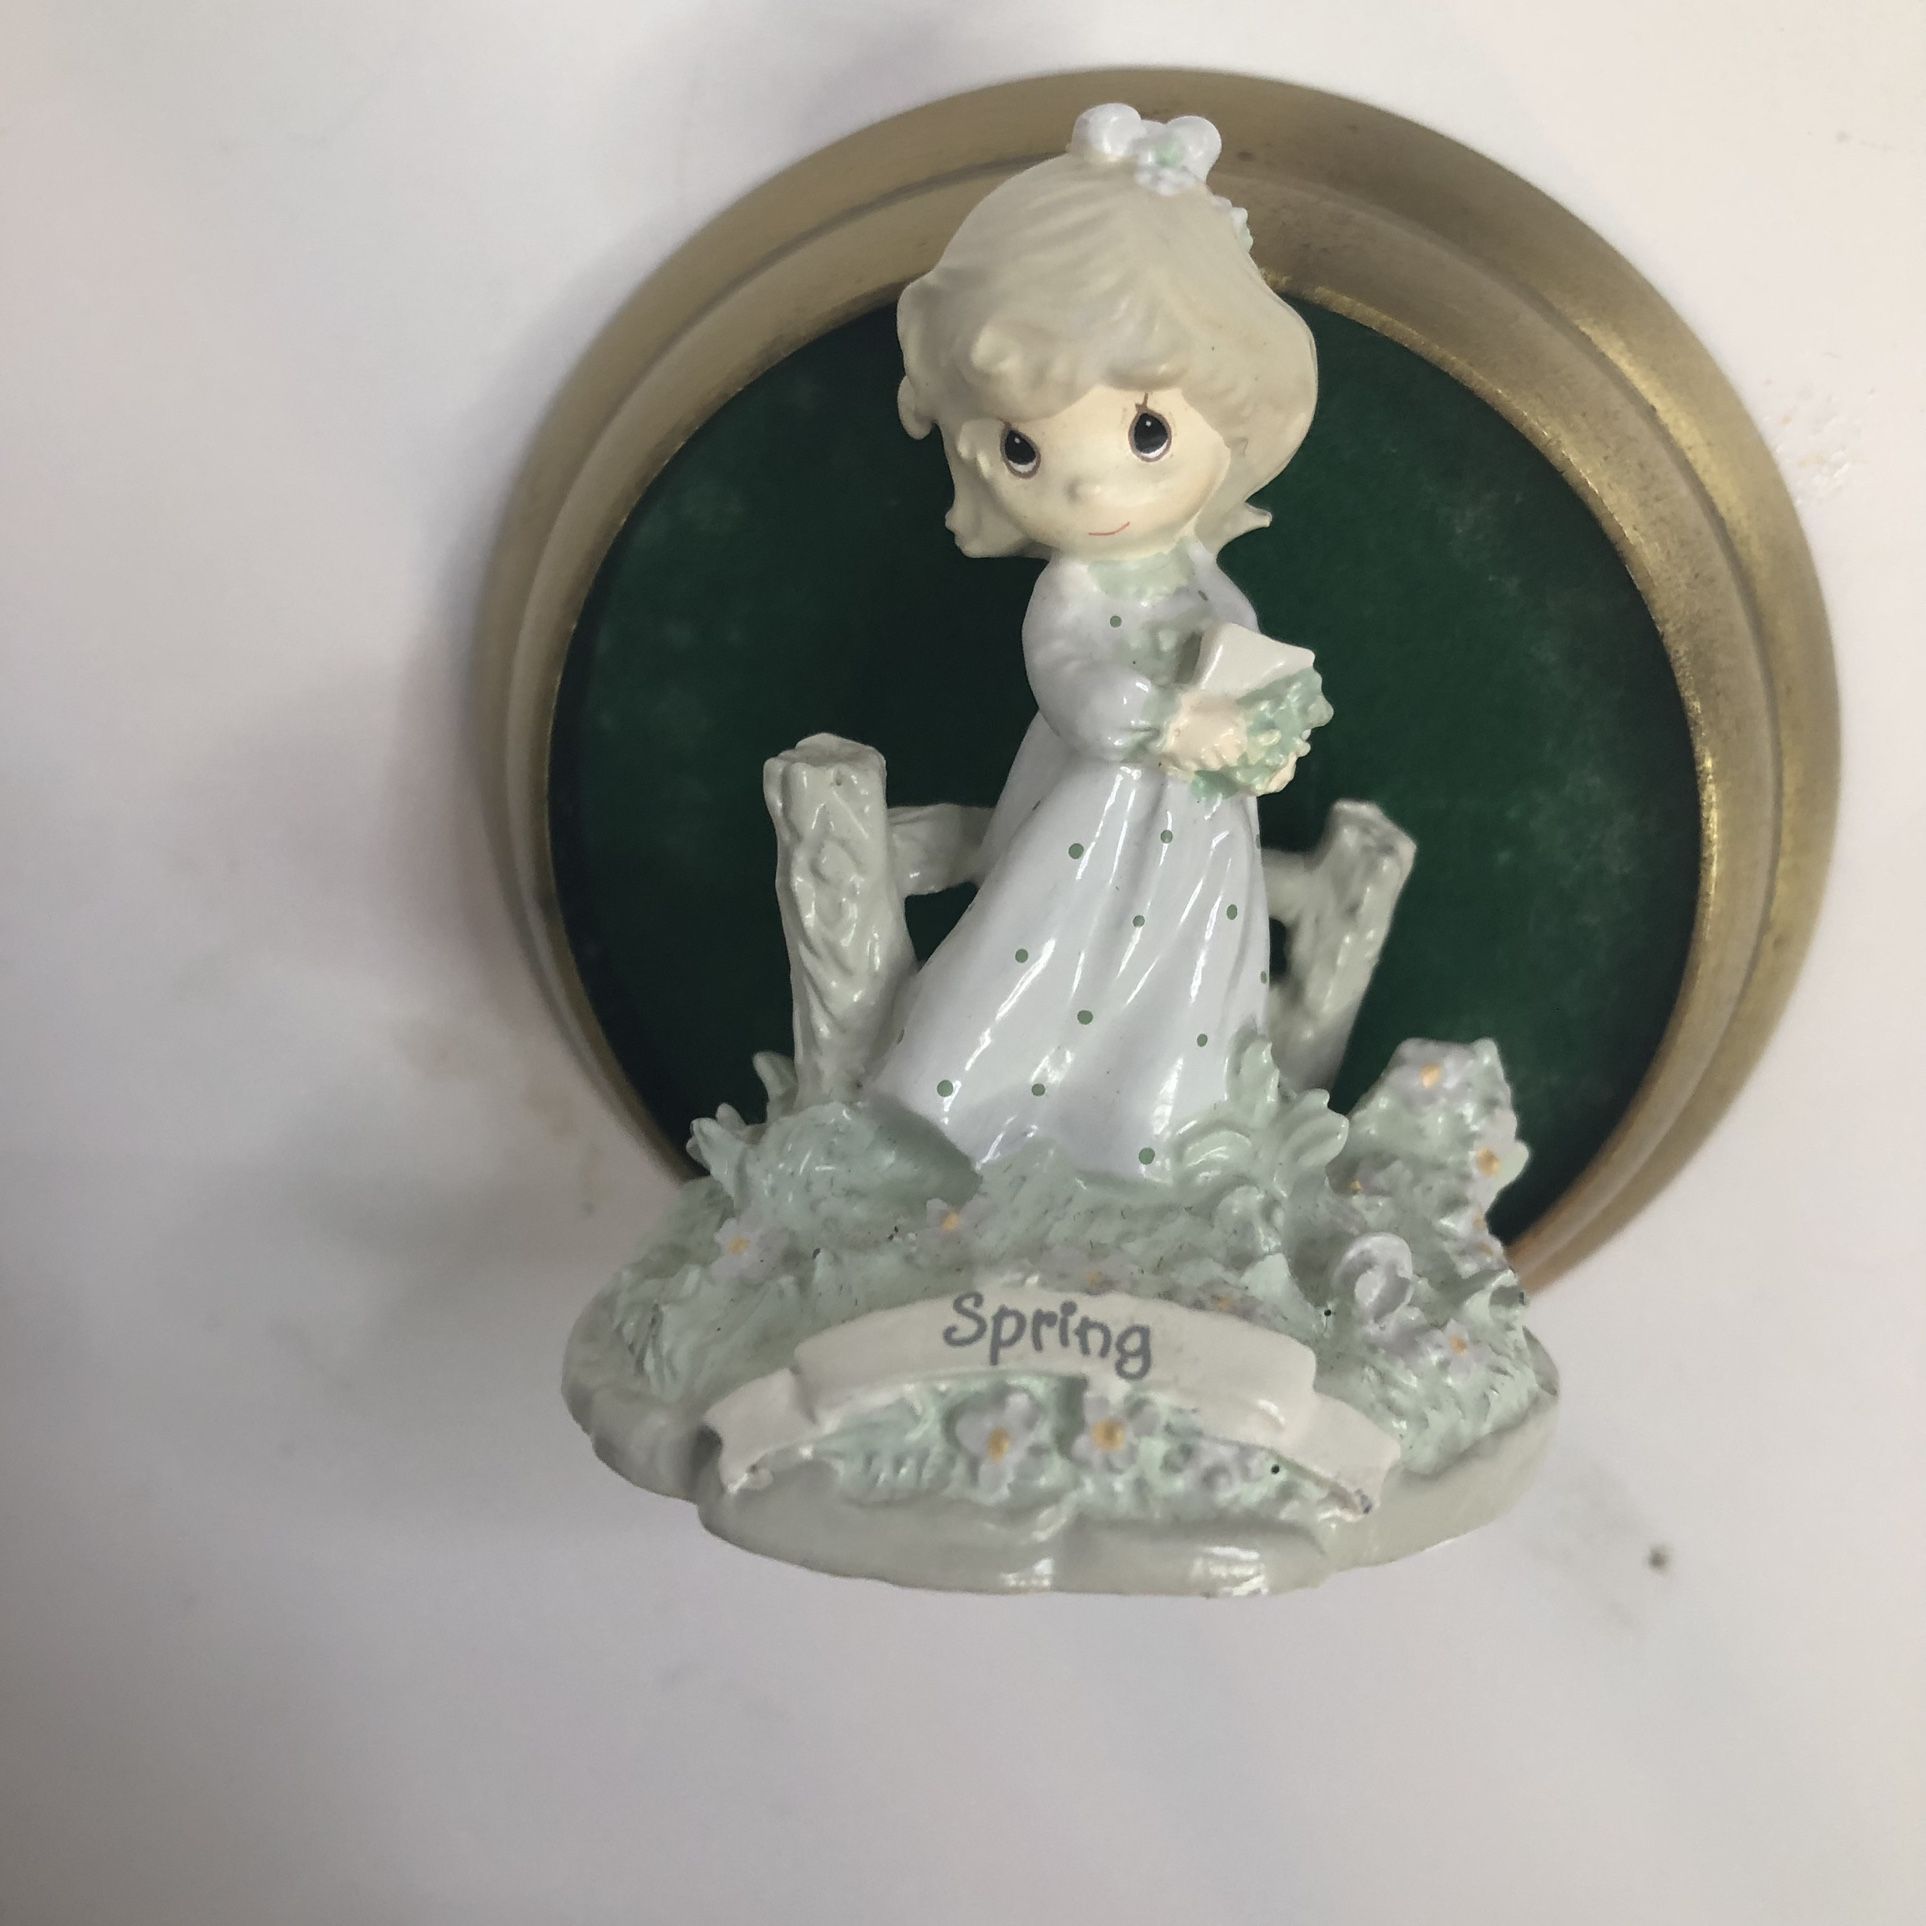 Precious Moments Spring Figure With Stand 1990